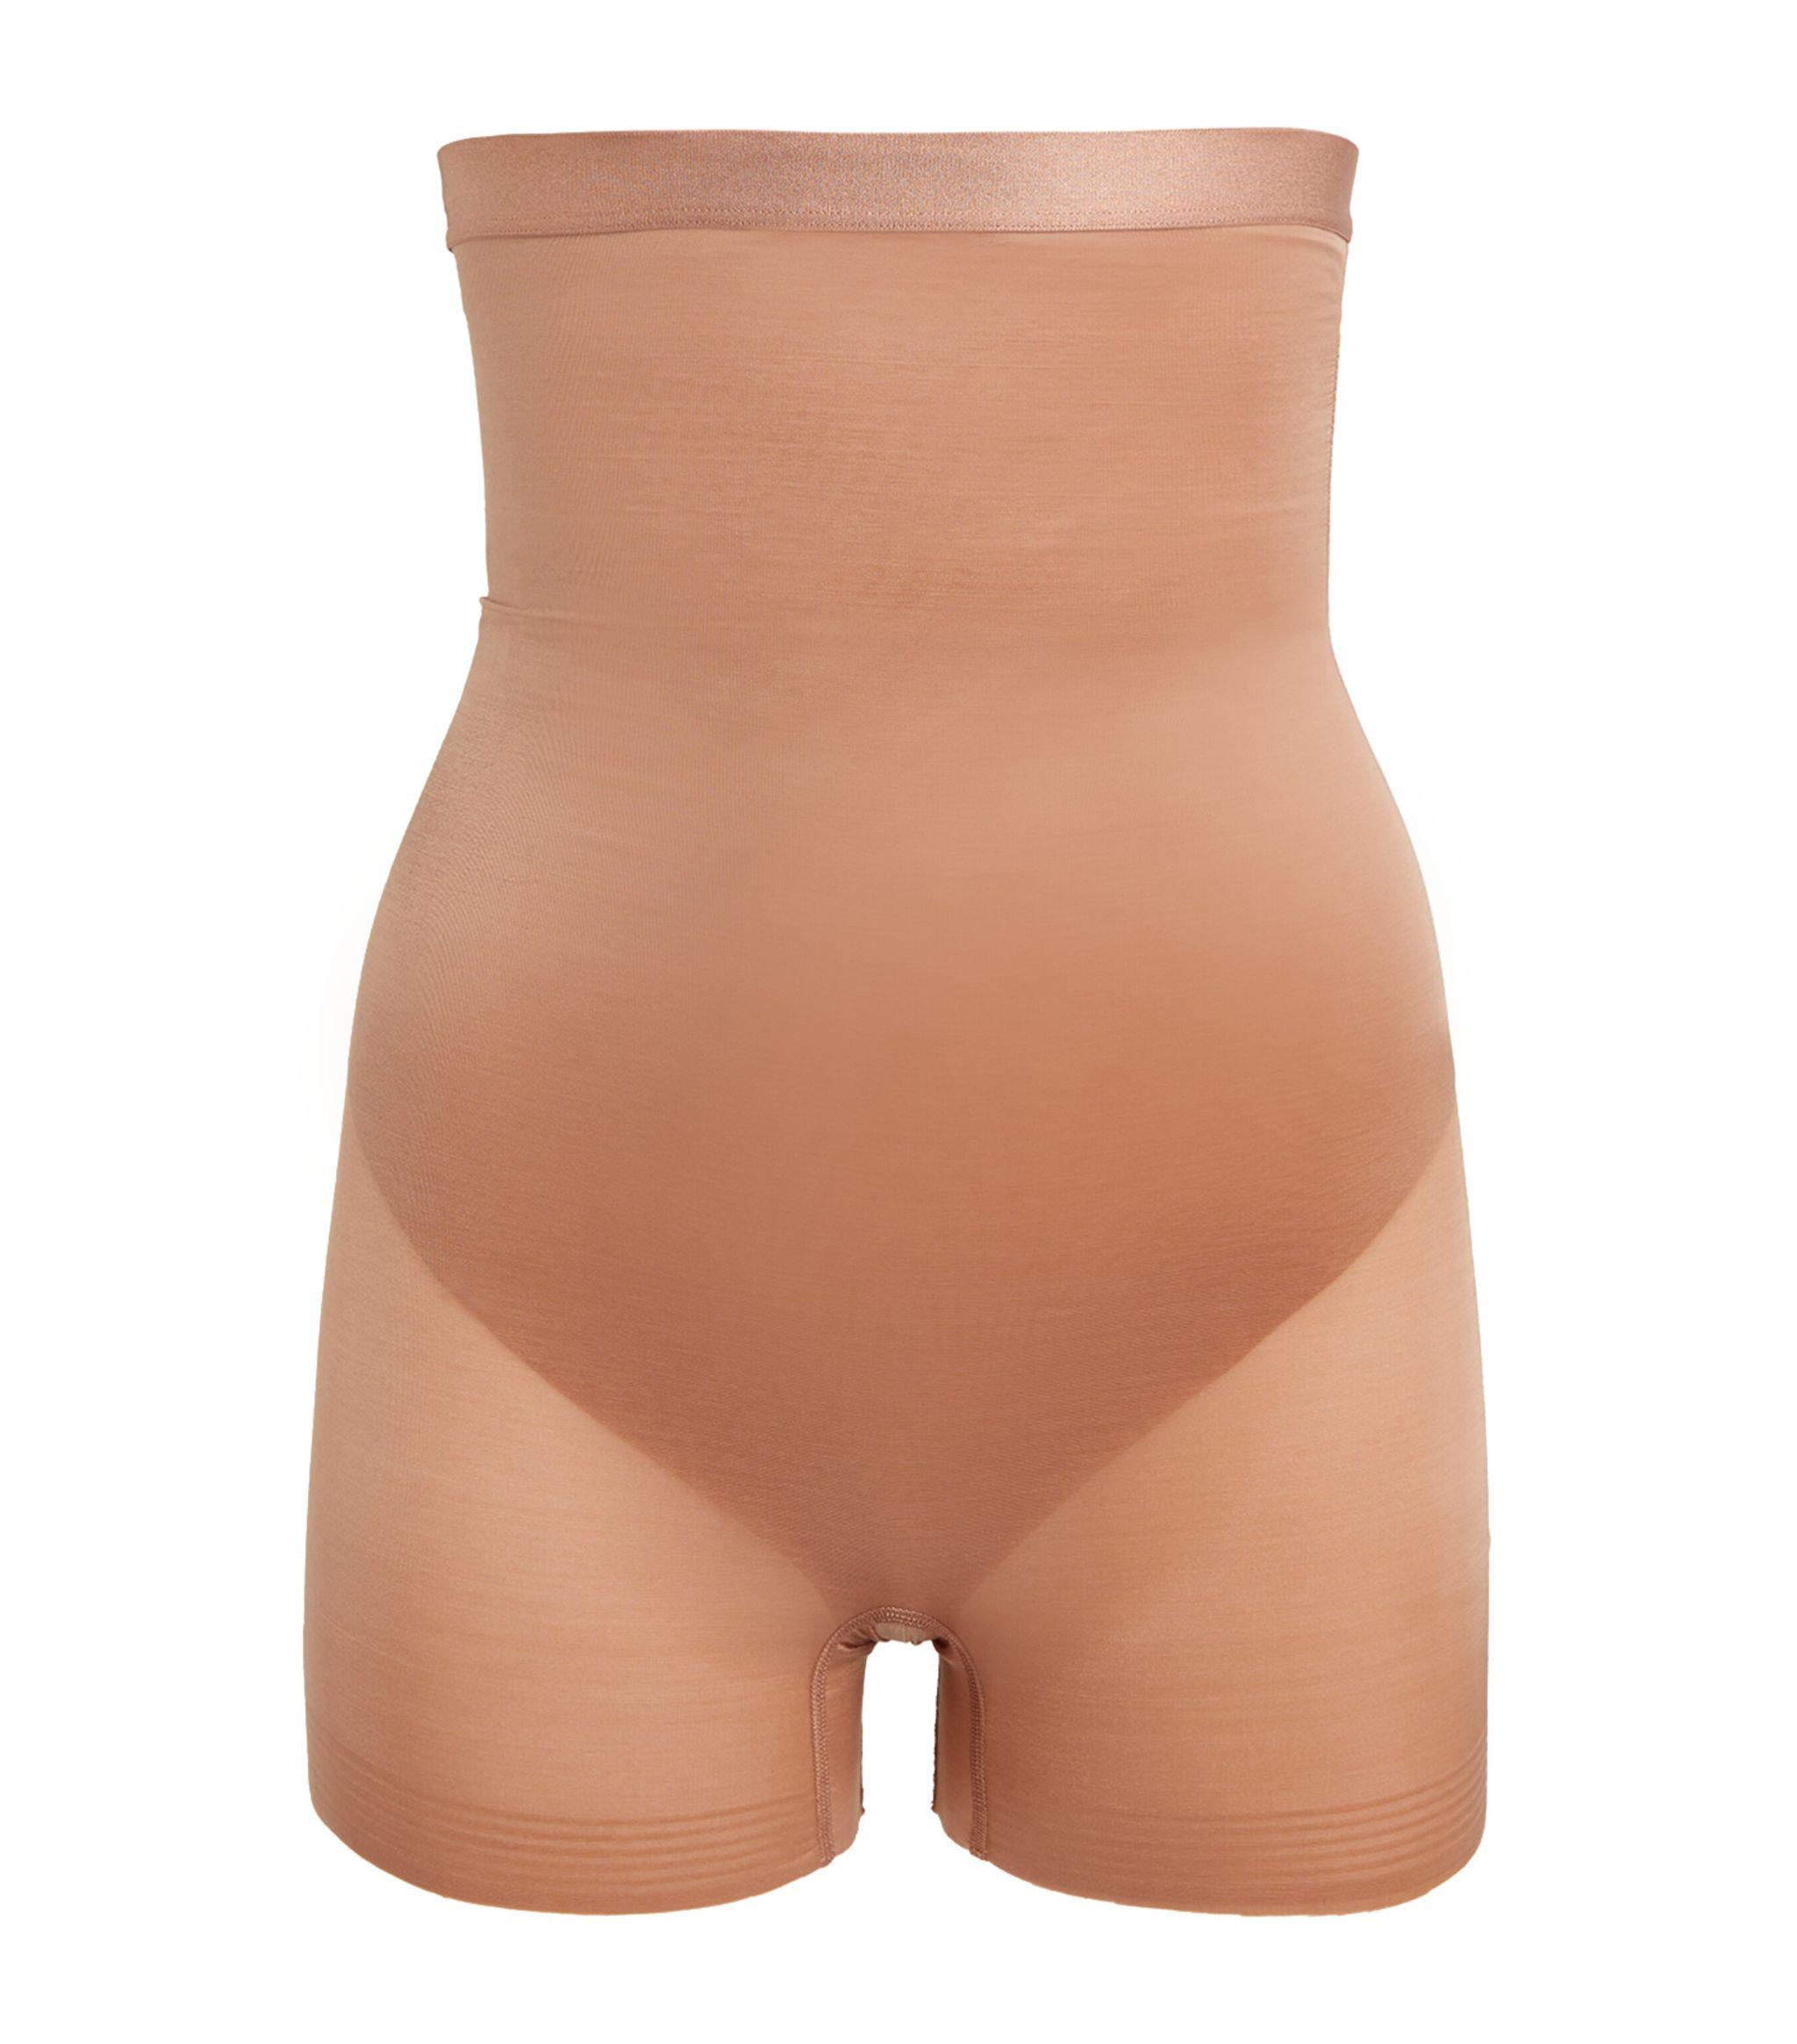 Barely There High-waist Shortie